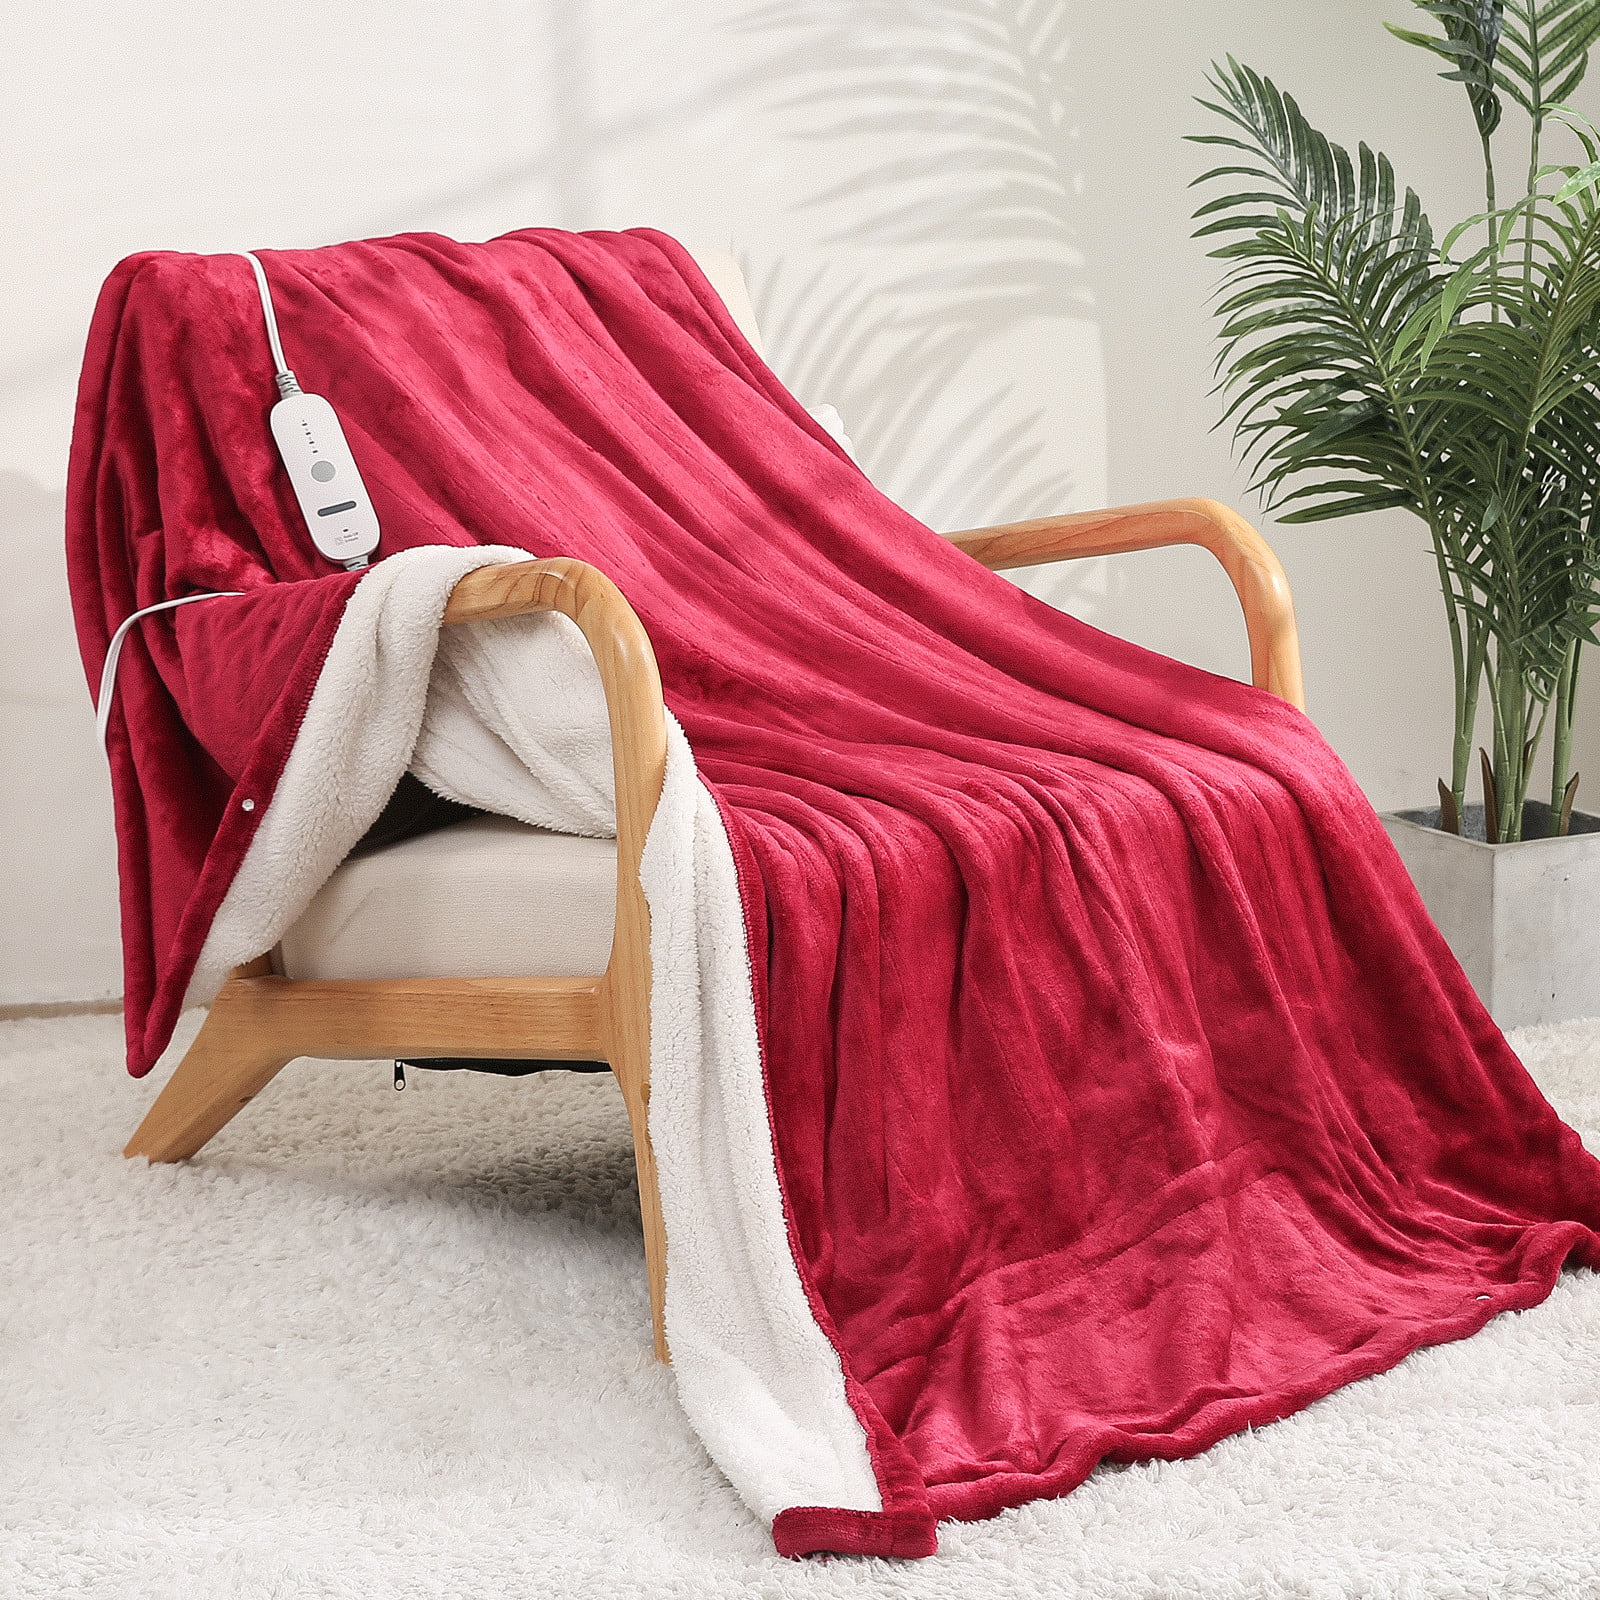 Details about   USB Heated Electric Warming Shawl Lap Blanket Heated Throw Neck Heating Shawl HN 